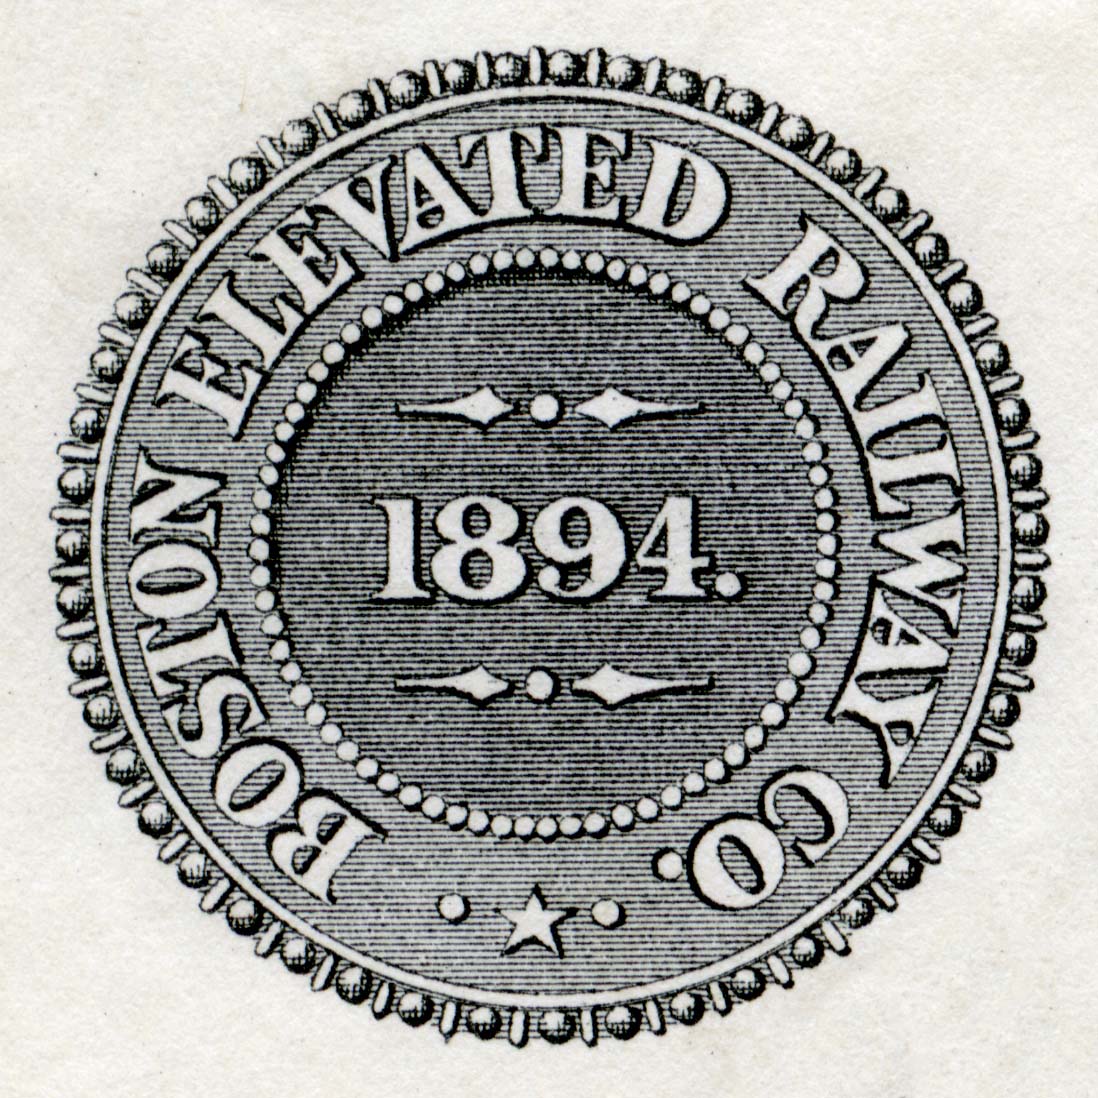 Image of Official Seal from Letterhead of Boston Elevated Railway Company